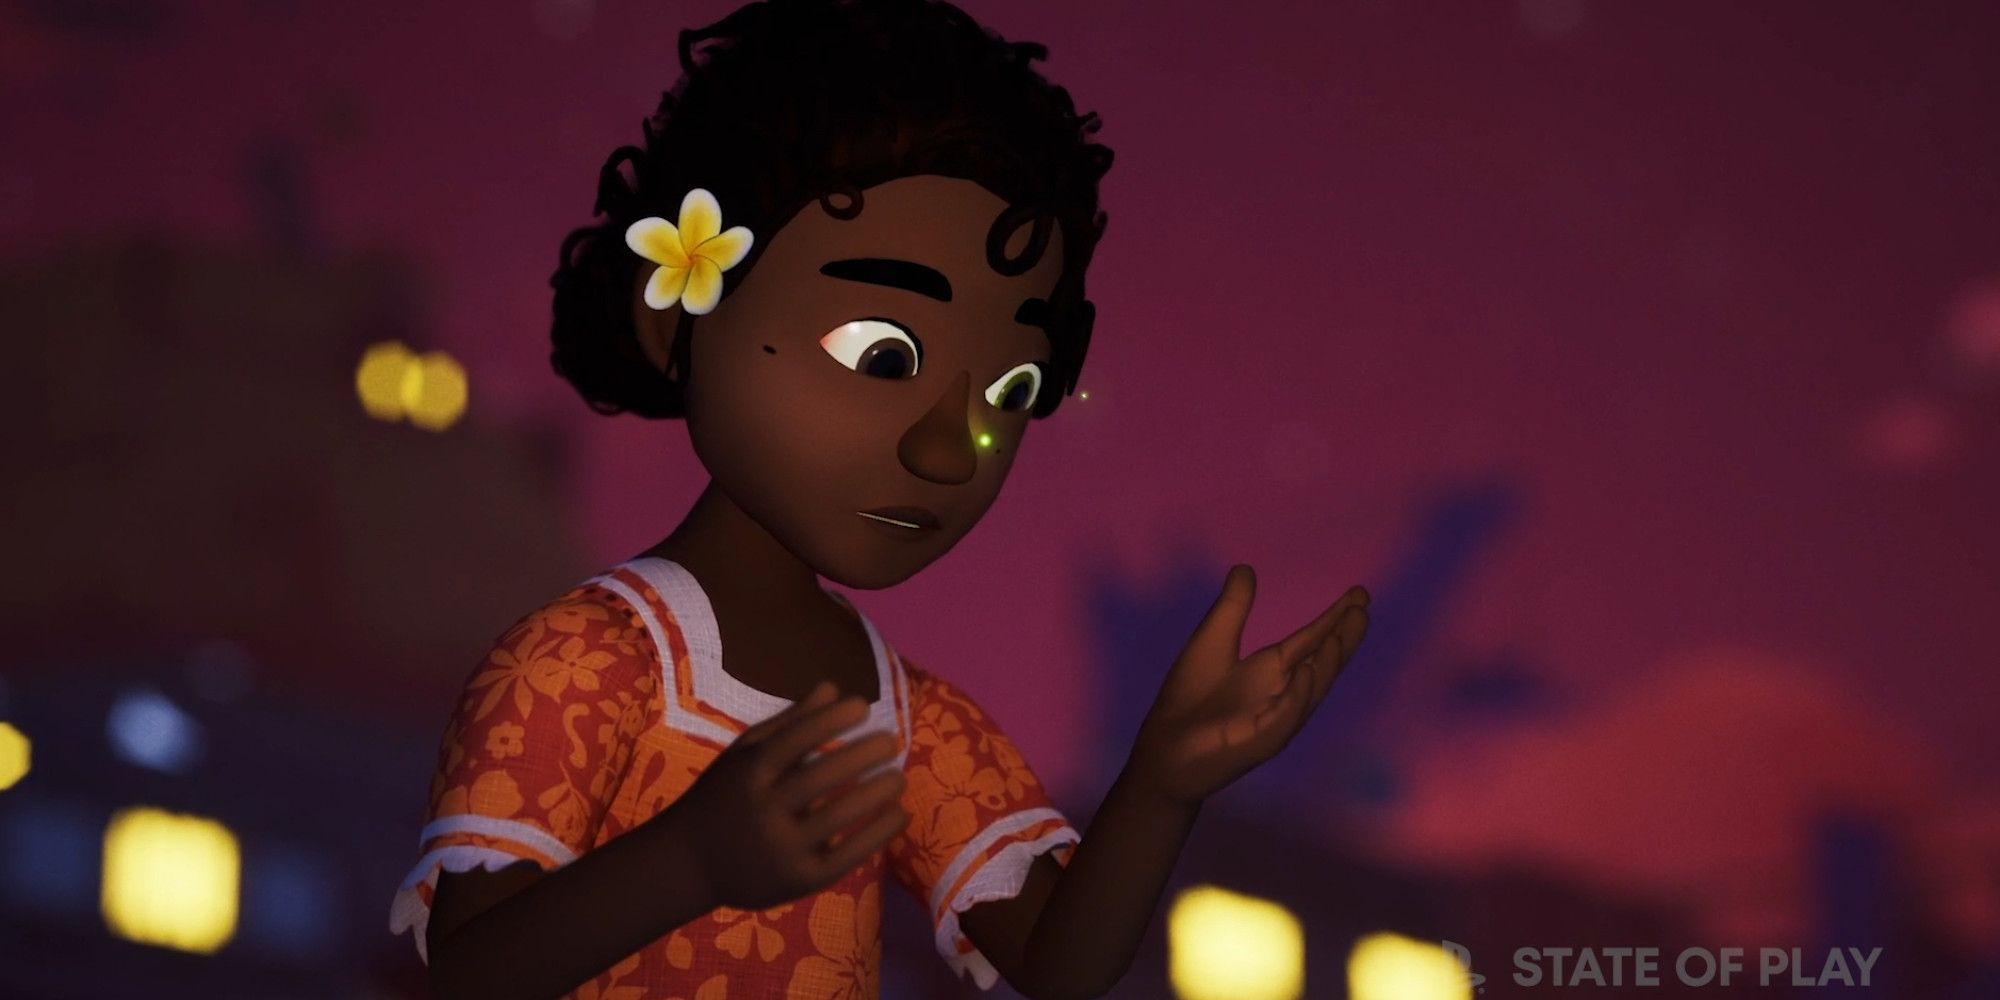 tchia the titular character is looking at fireflies in her hands